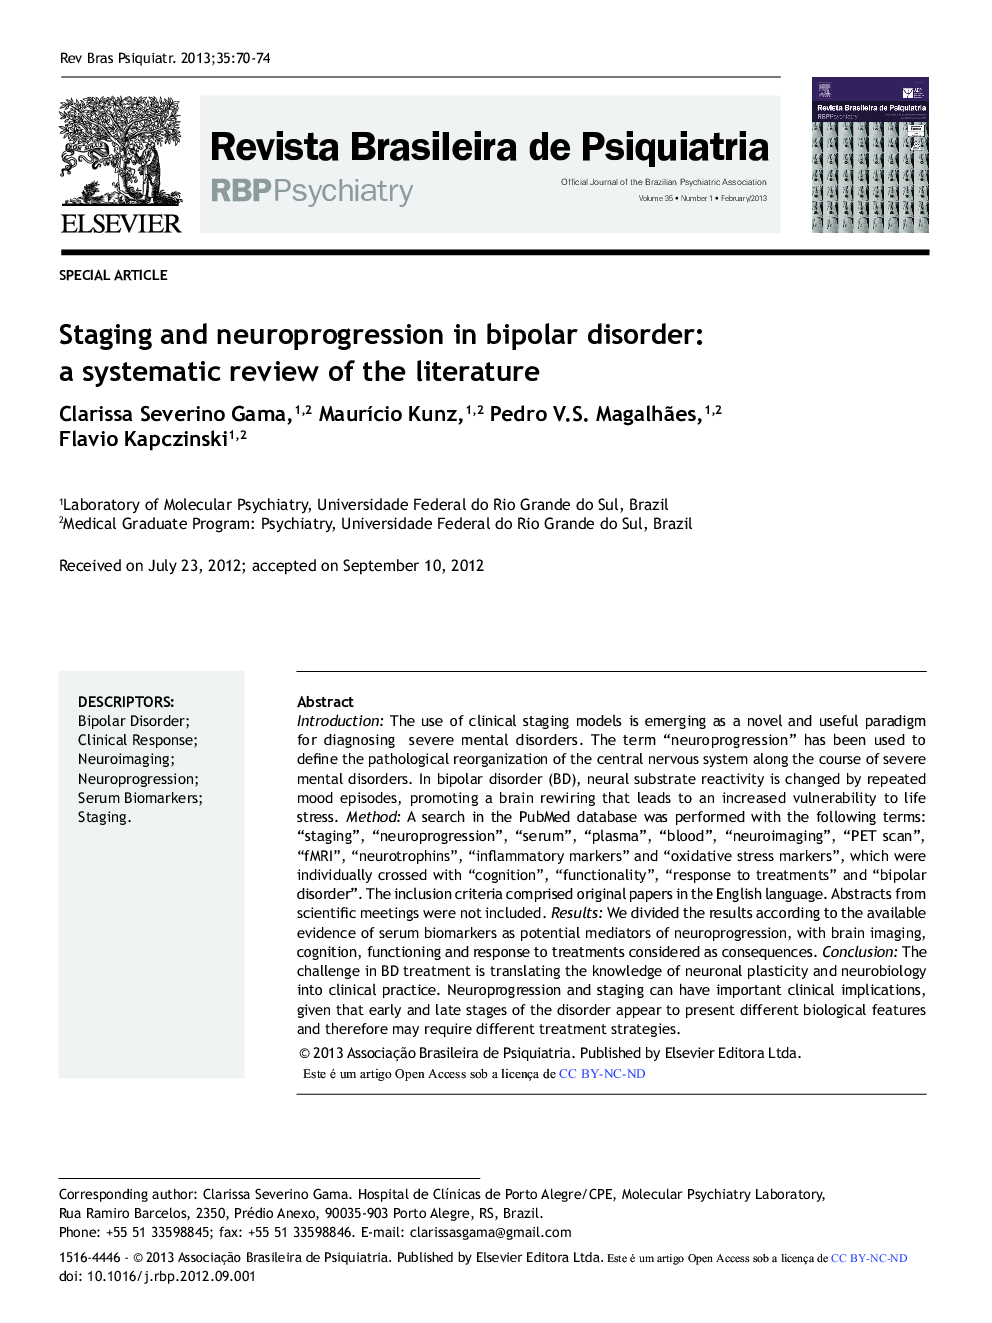 Staging and Neuroprogression in Bipolar Disorder: A Systematic Review of the Literature